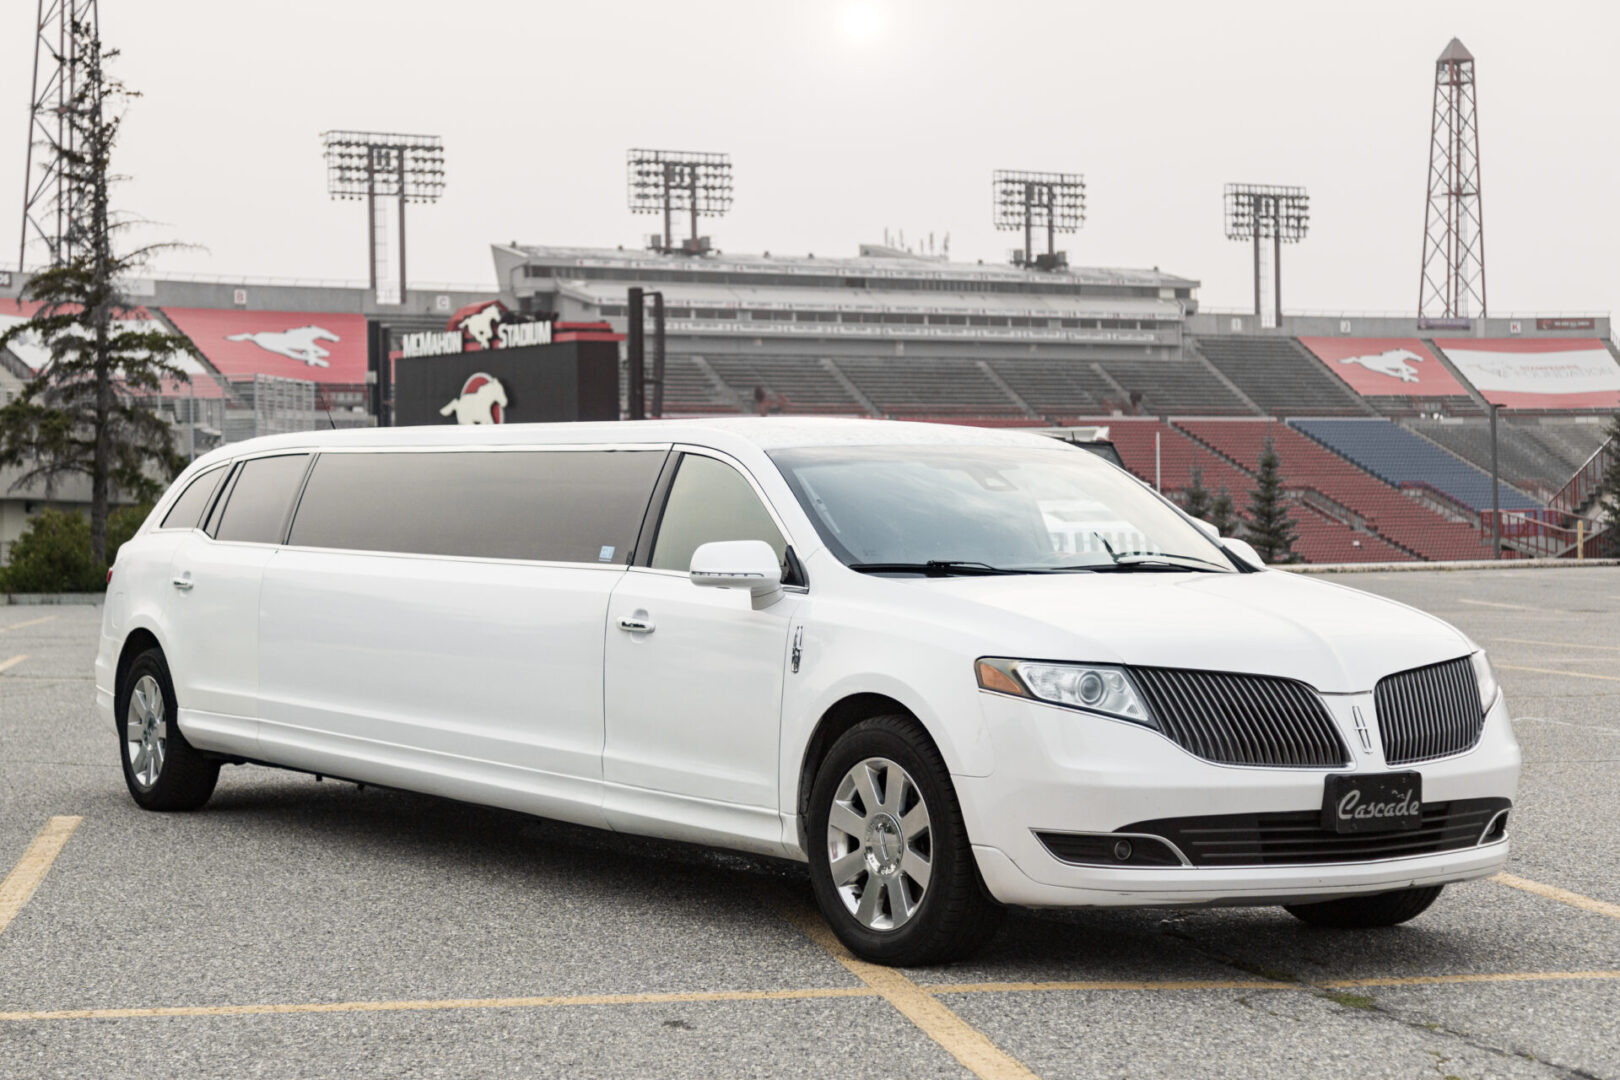 A white stretch limo parked in front of an empty stadium.